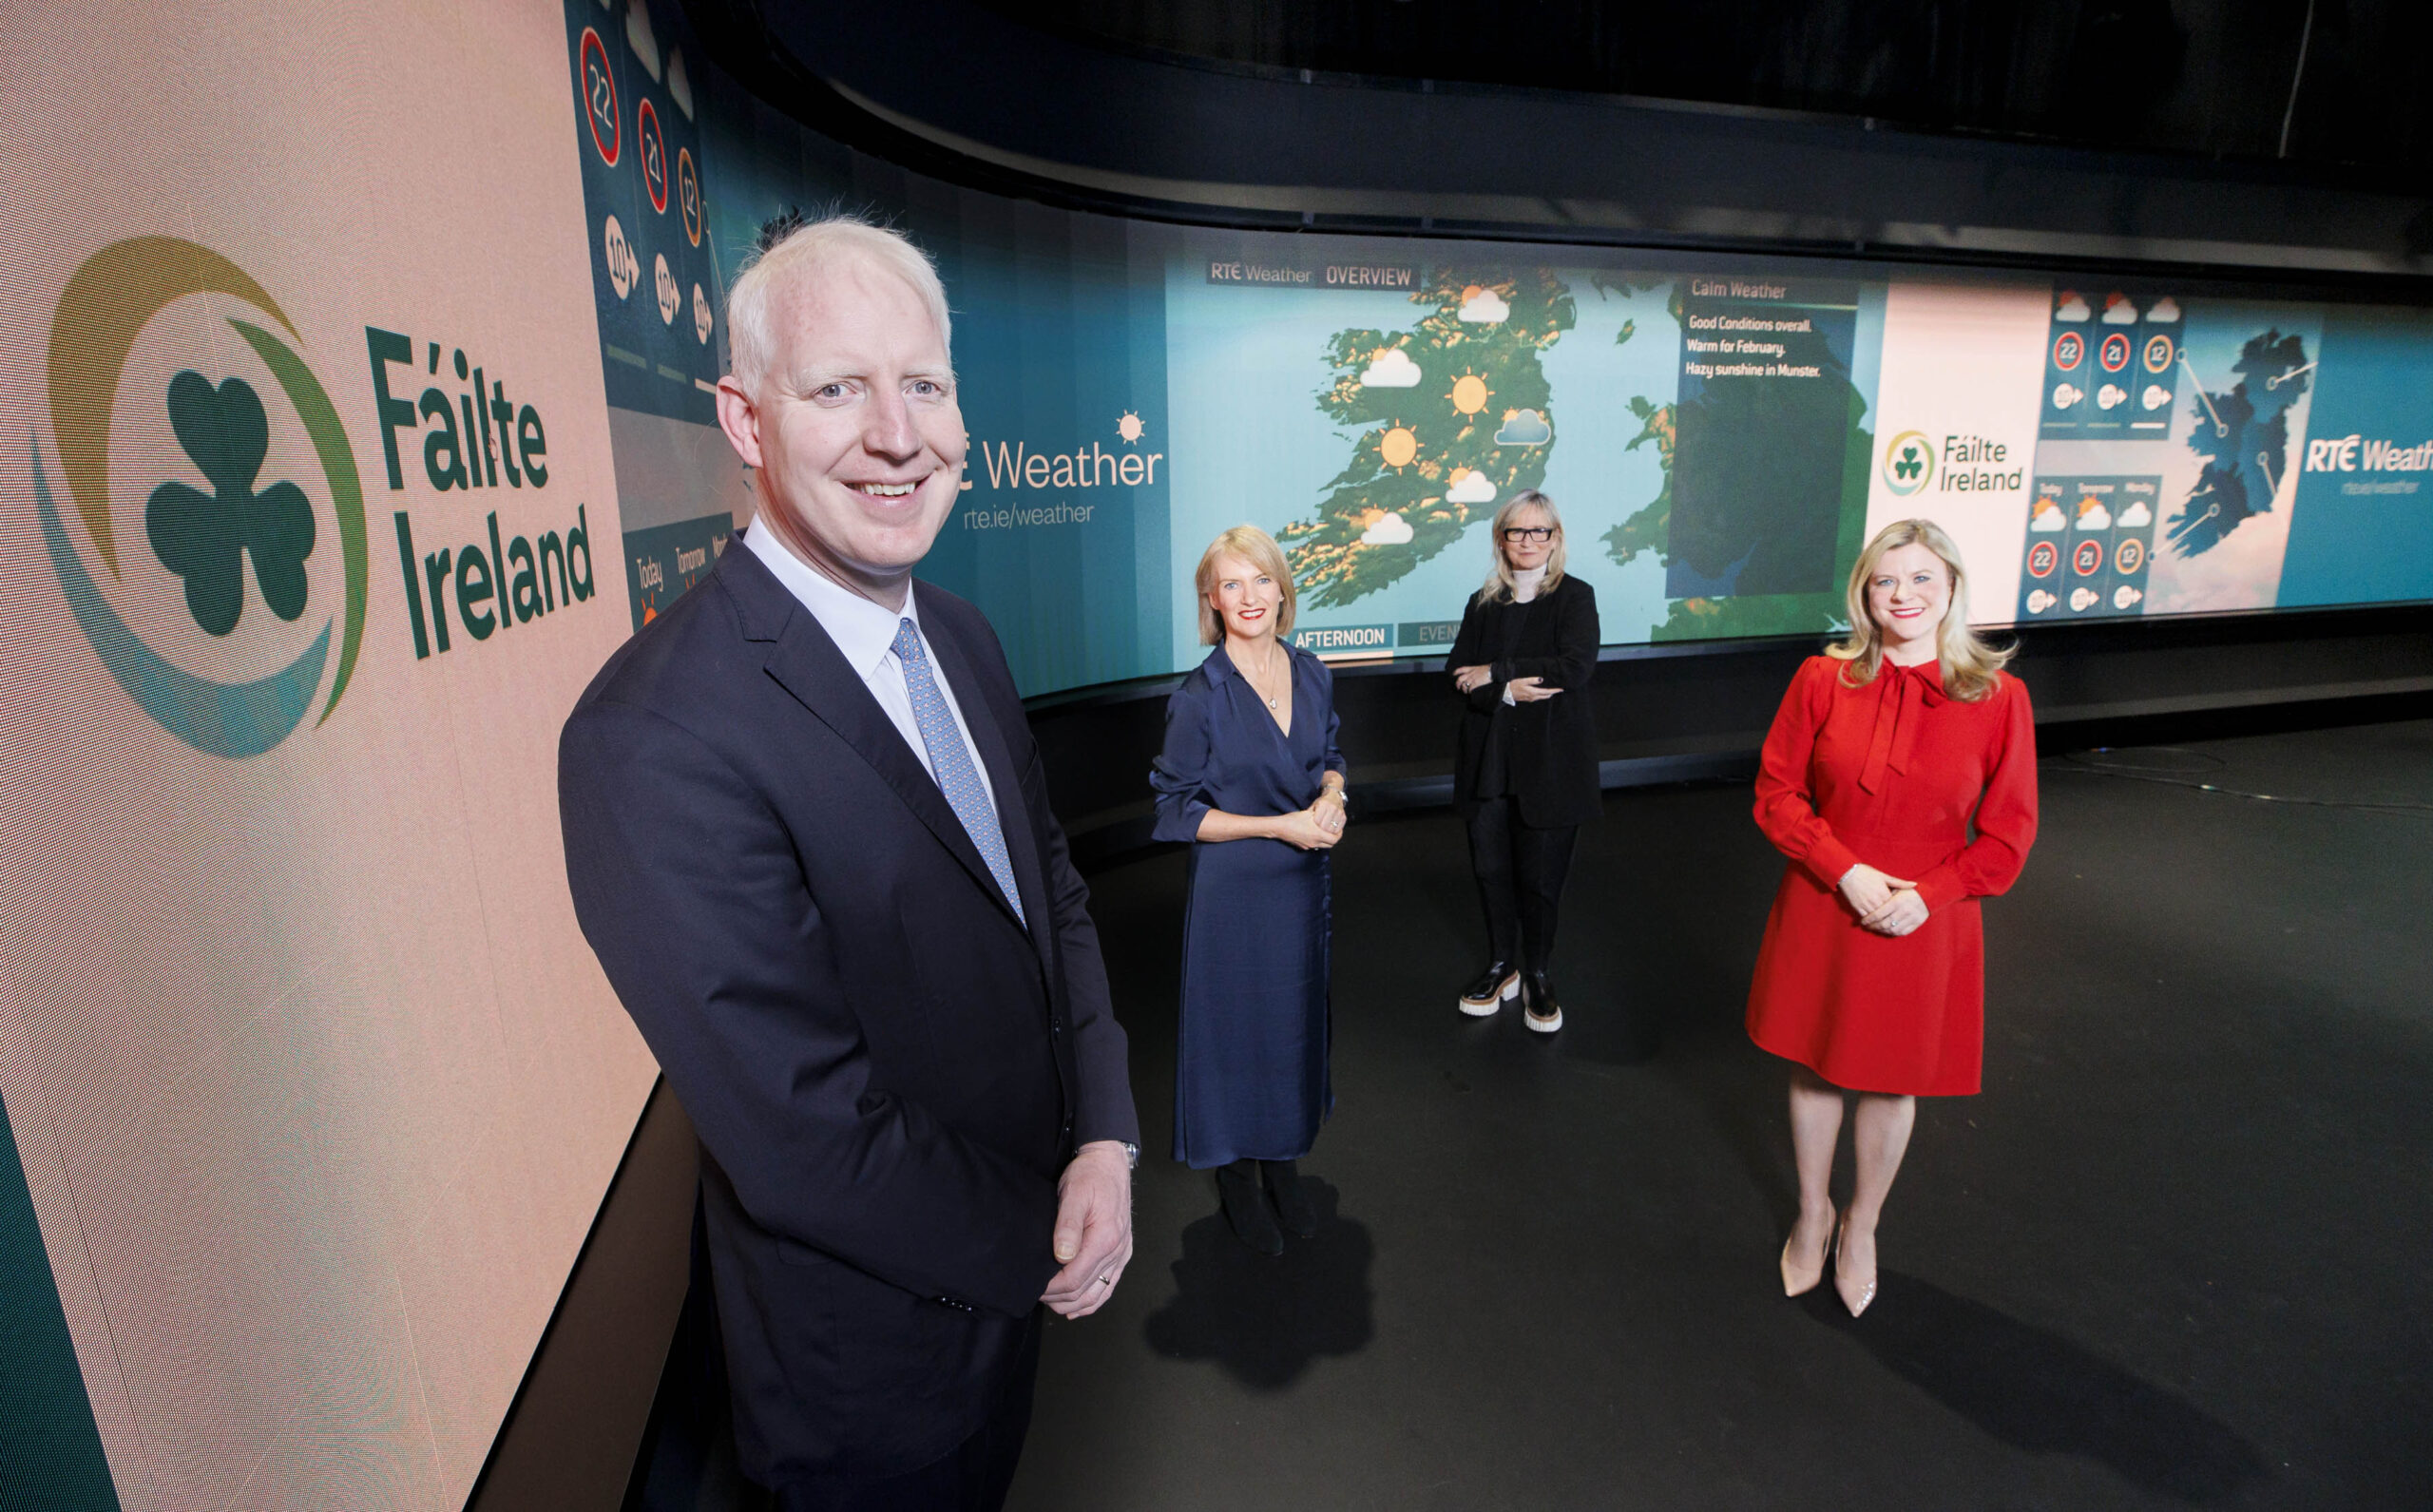 Fáilte Ireland announces sponsorship of RTÉ Weather to drive recovery of tourism sector